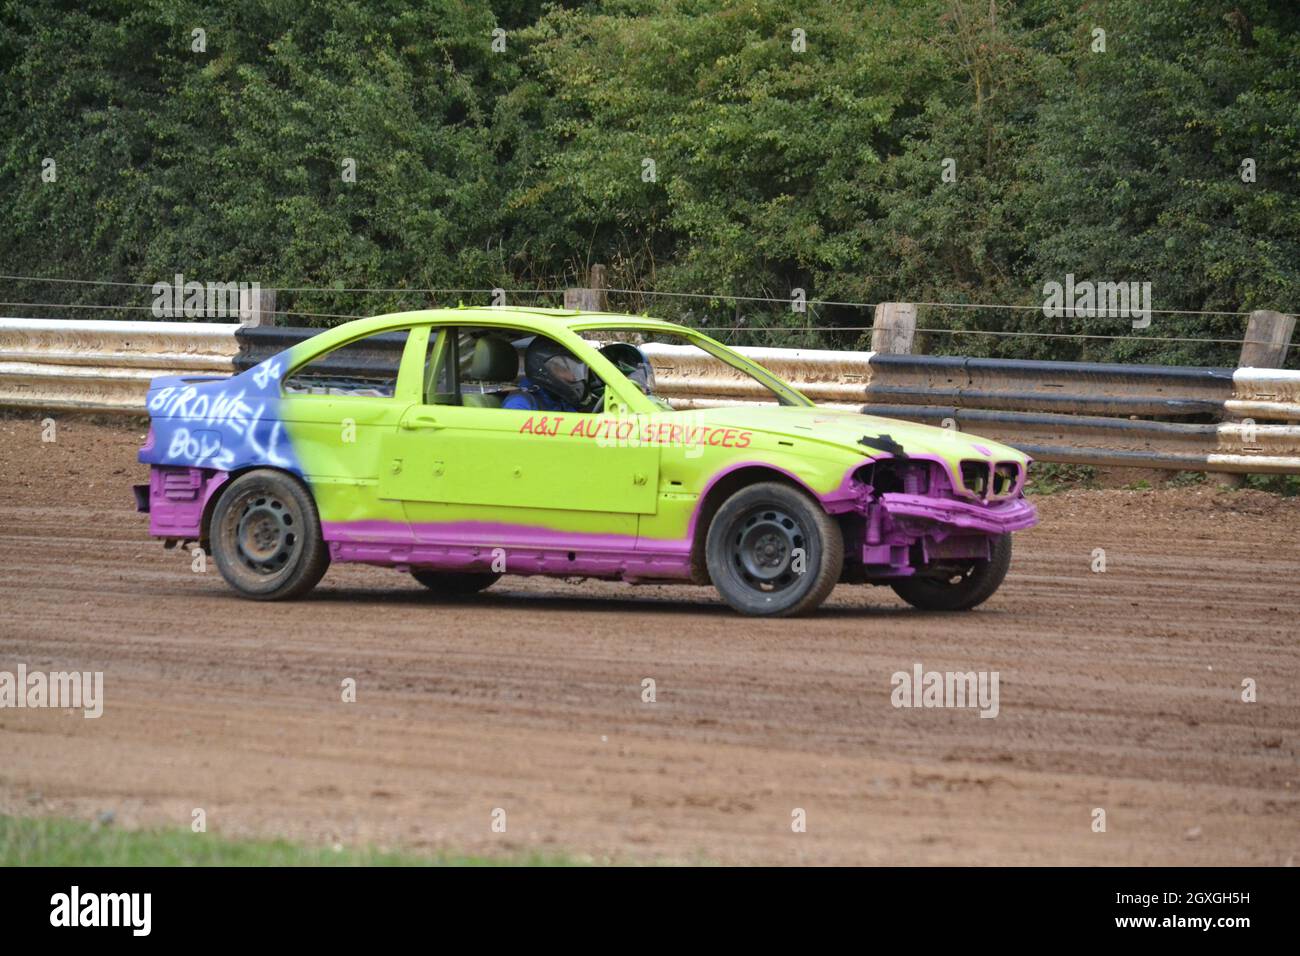 BMW - Drifter Race car - Grass Track Racing - Dirt Track - Extreme Sport - Motorsports - Hunmanby - Yorkshire - UK Banque D'Images